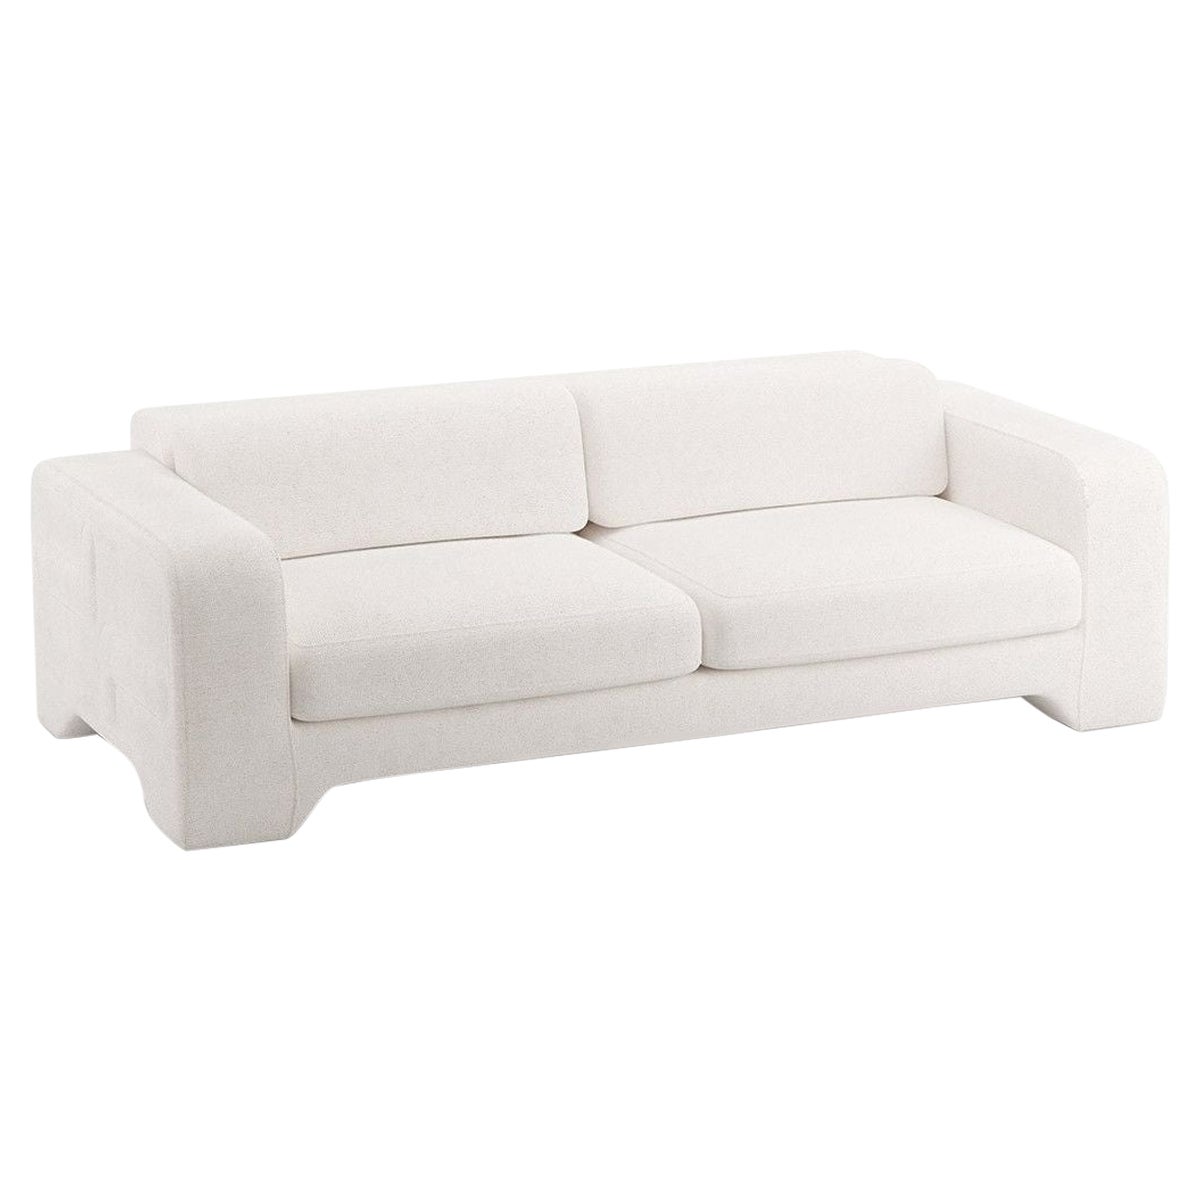 Popus Editions Giovanna 3 Seater Sofa in Ivory Megeve Fabric with Knit Effect